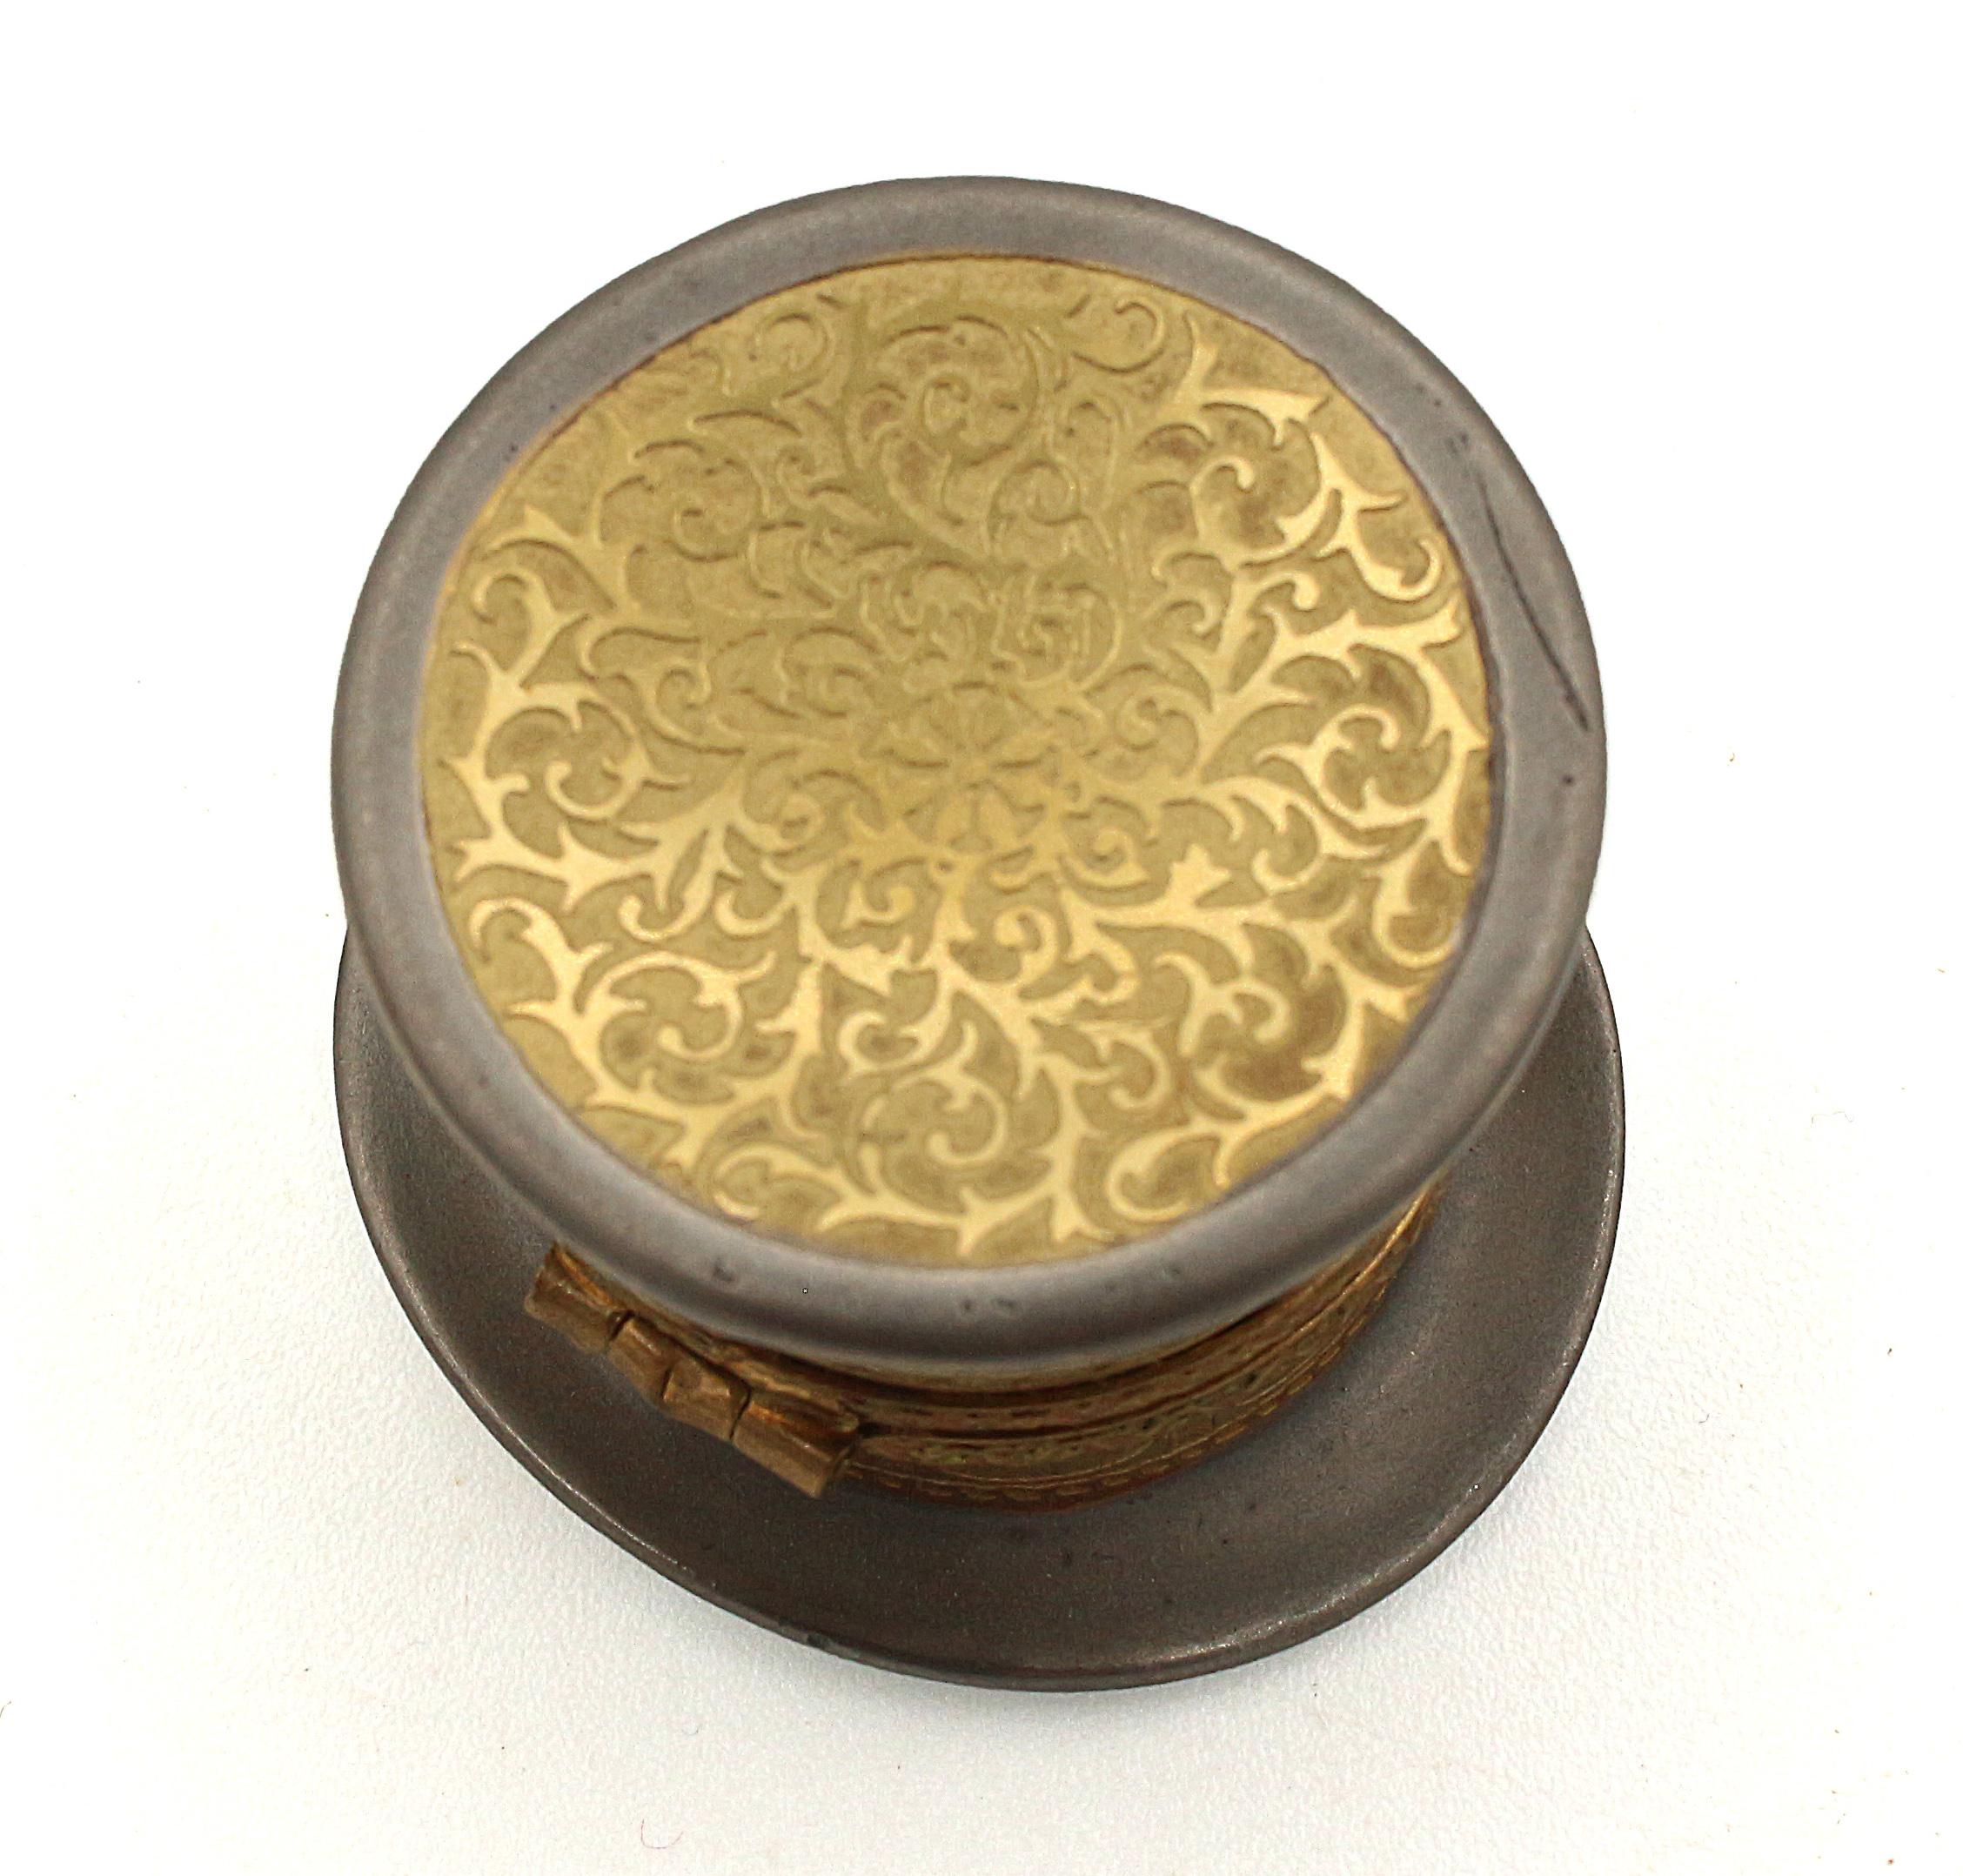 Limoges pill box in the form of a top hat, French, later 20th century. Gilded & silvered. Marked: Limoges France, Peint main, Incrustation or fin (painted by hand, fine gold inlay).
1 5/8